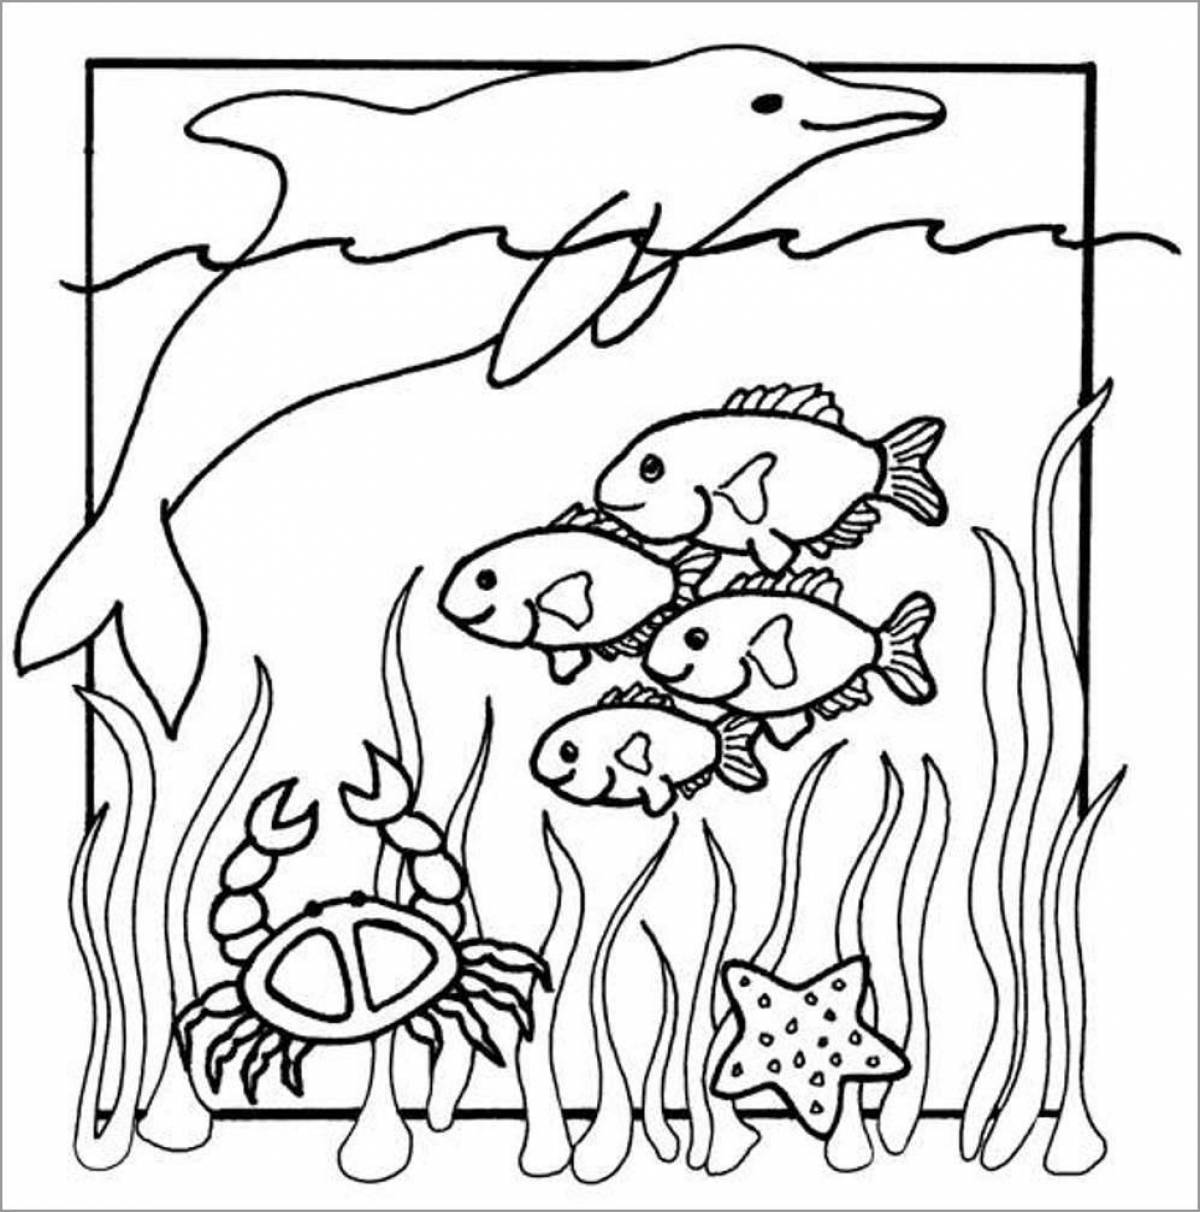 Exotic sea creatures coloring pages